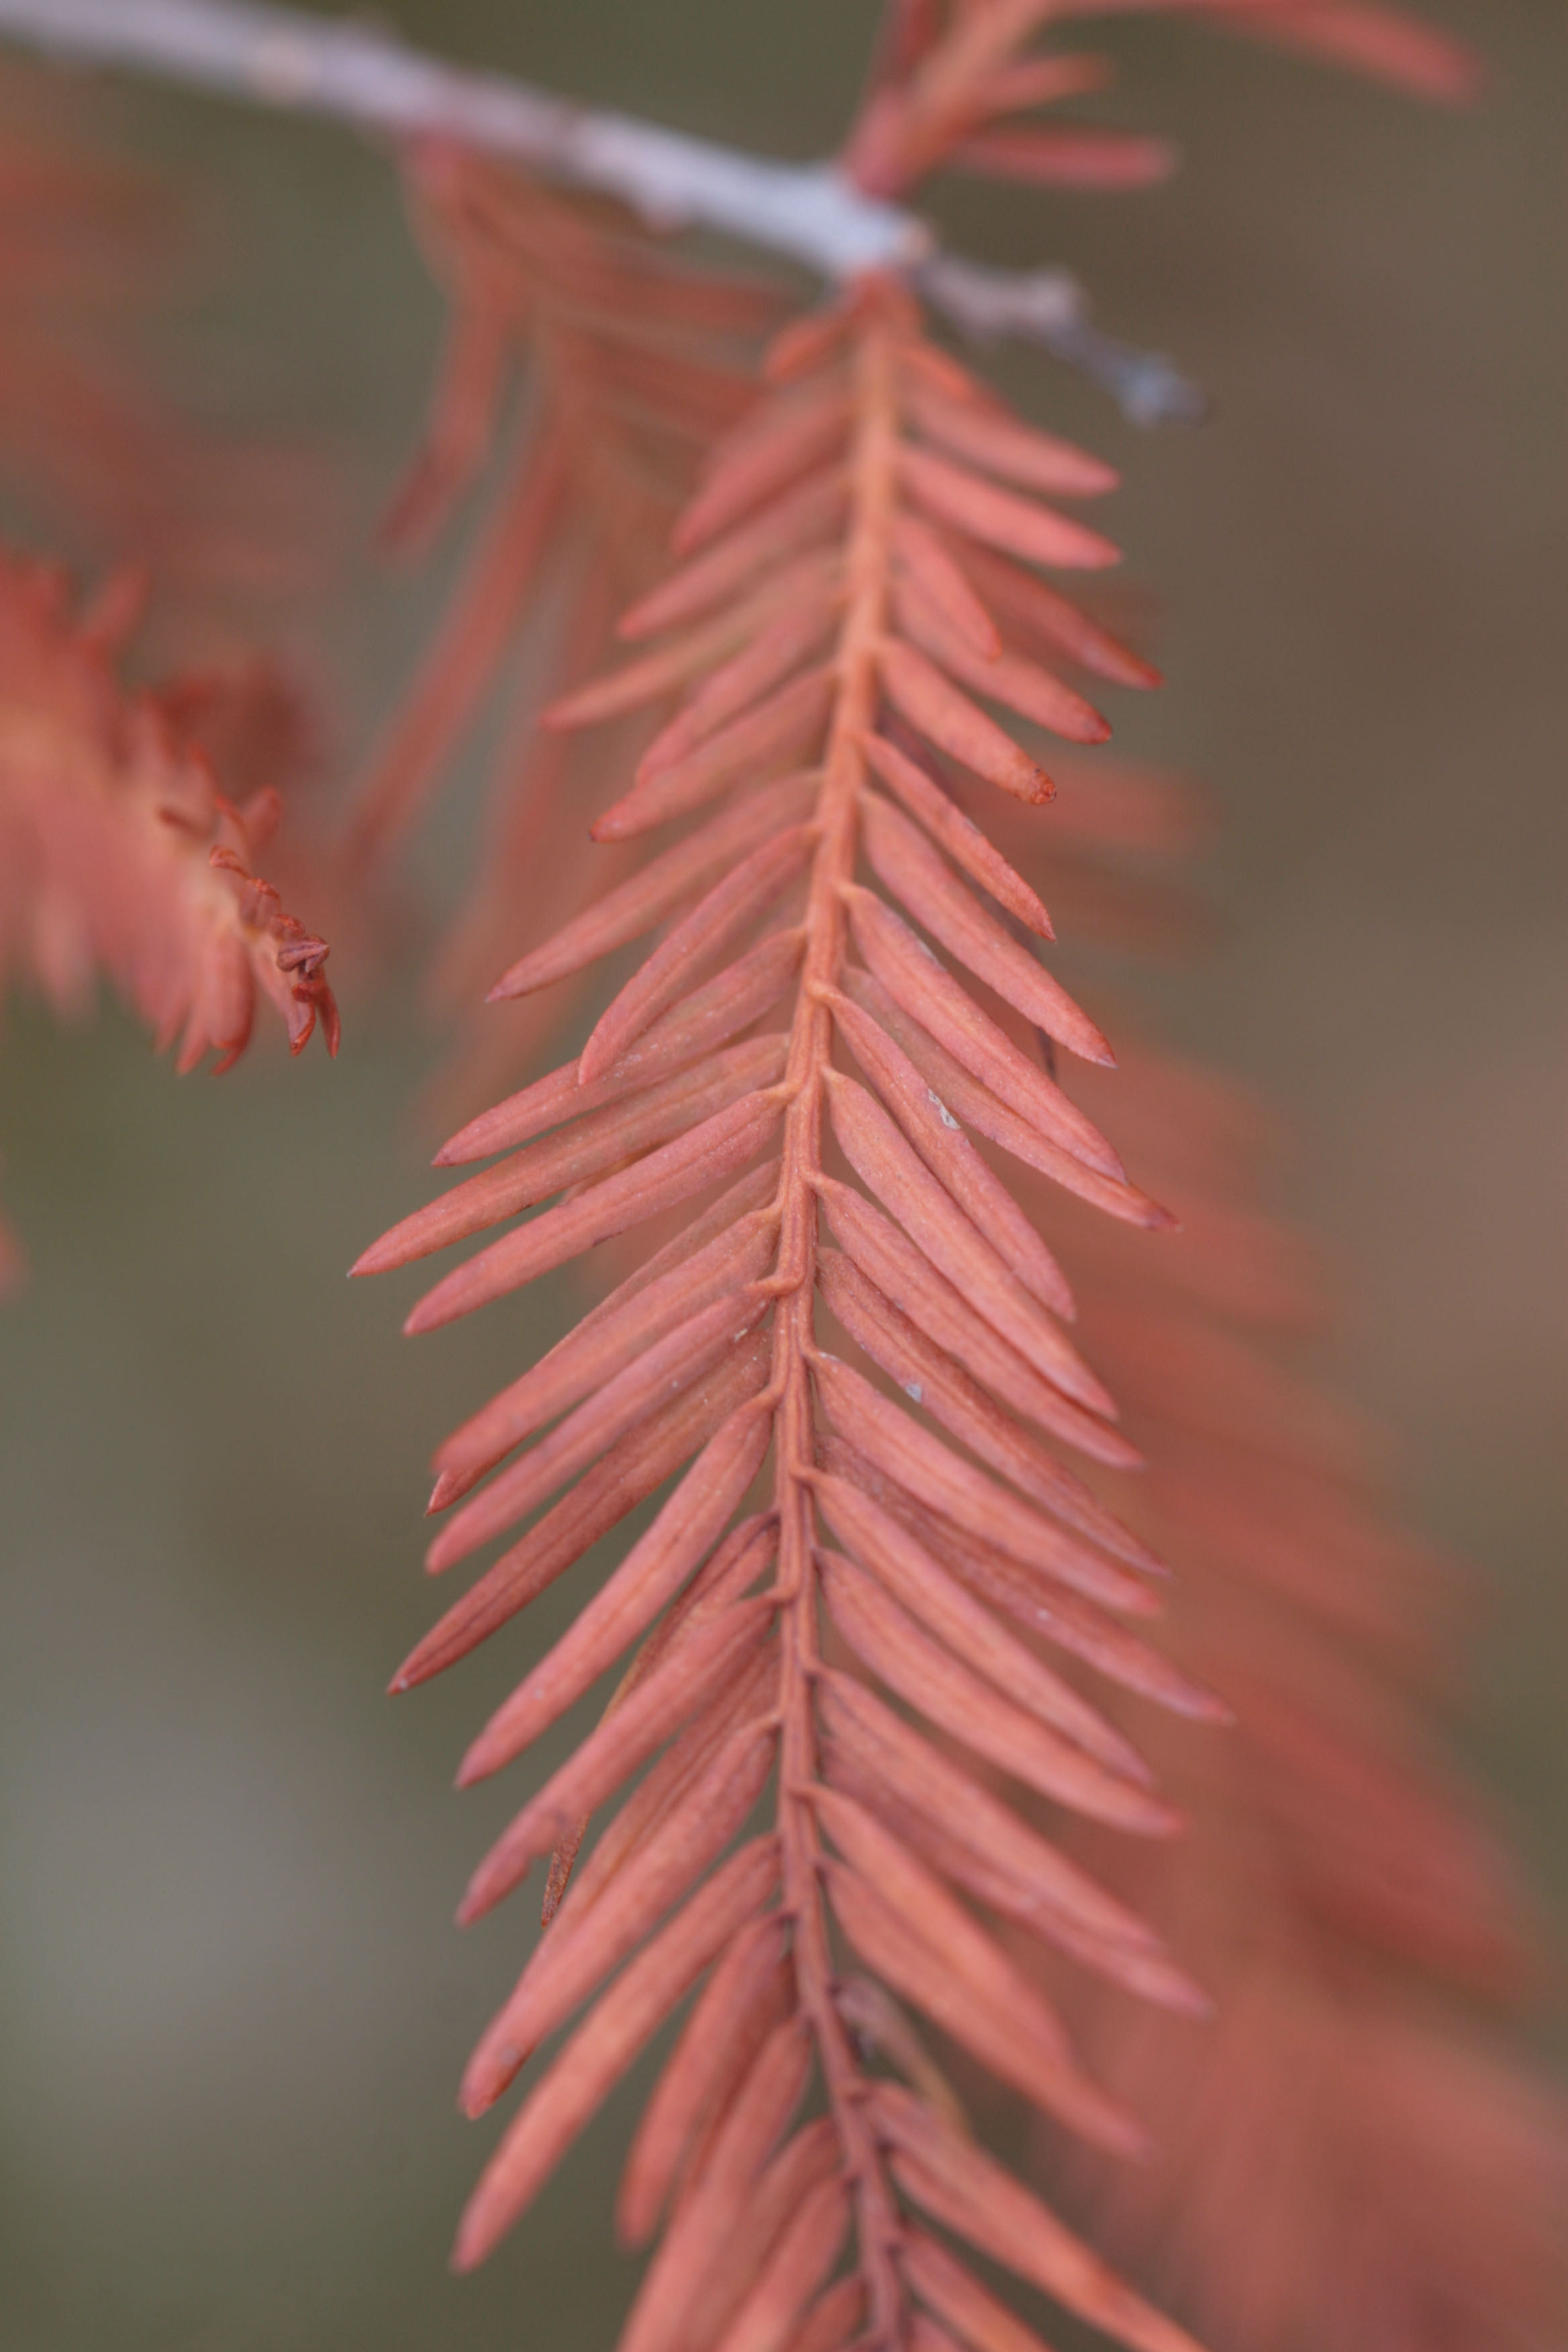 The Scientific Name is Taxodium distichum. You will likely hear them called Bald Cypress, Baldcypress, Swamp Cypress. This picture shows the Close-up of Fall foliage of Taxodium distichum